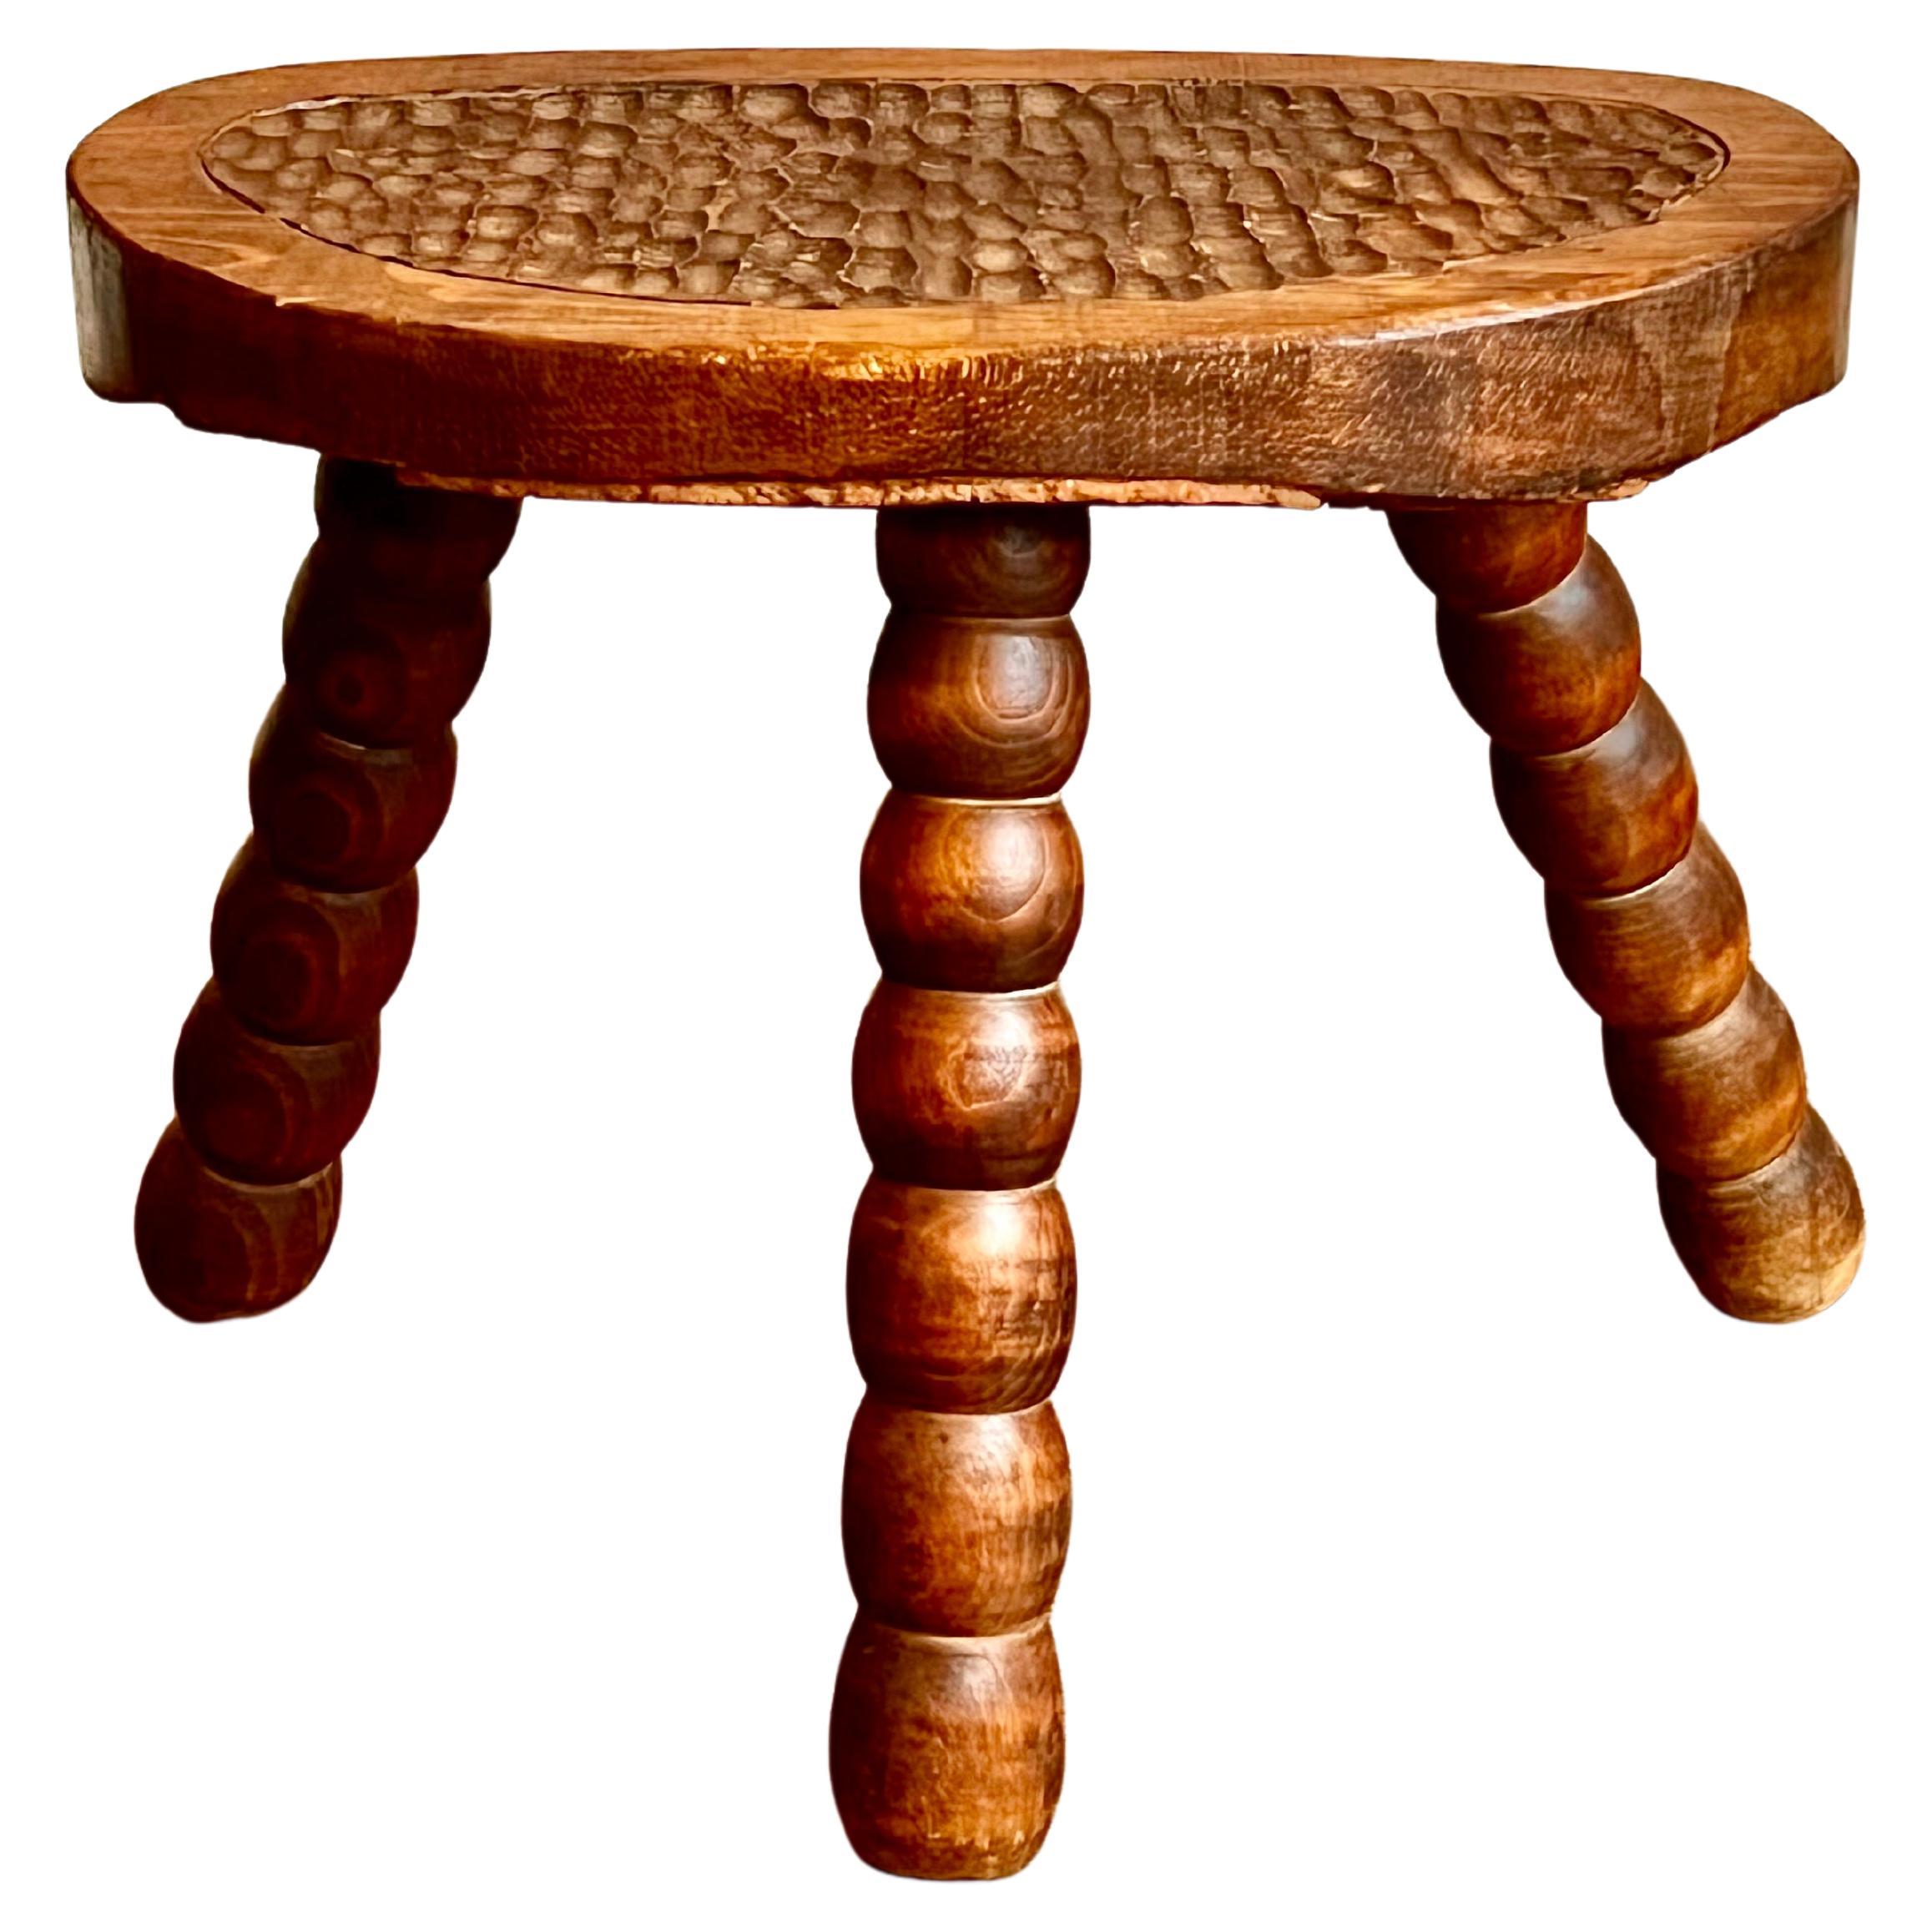 1960s French Brutalist Tripod Stool For Sale